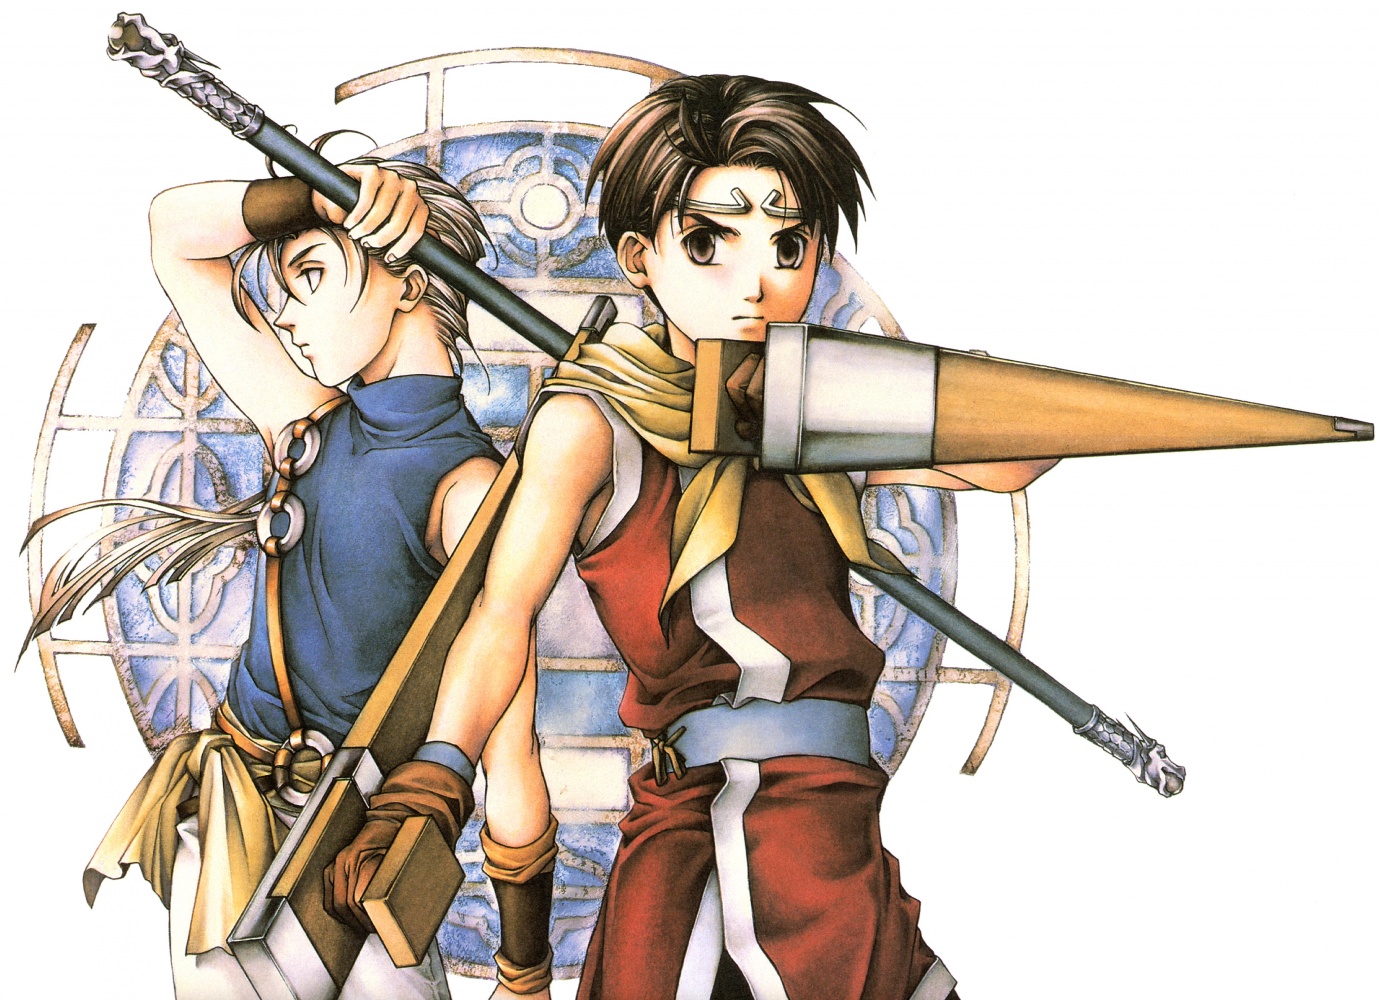 download save file suikoden 1